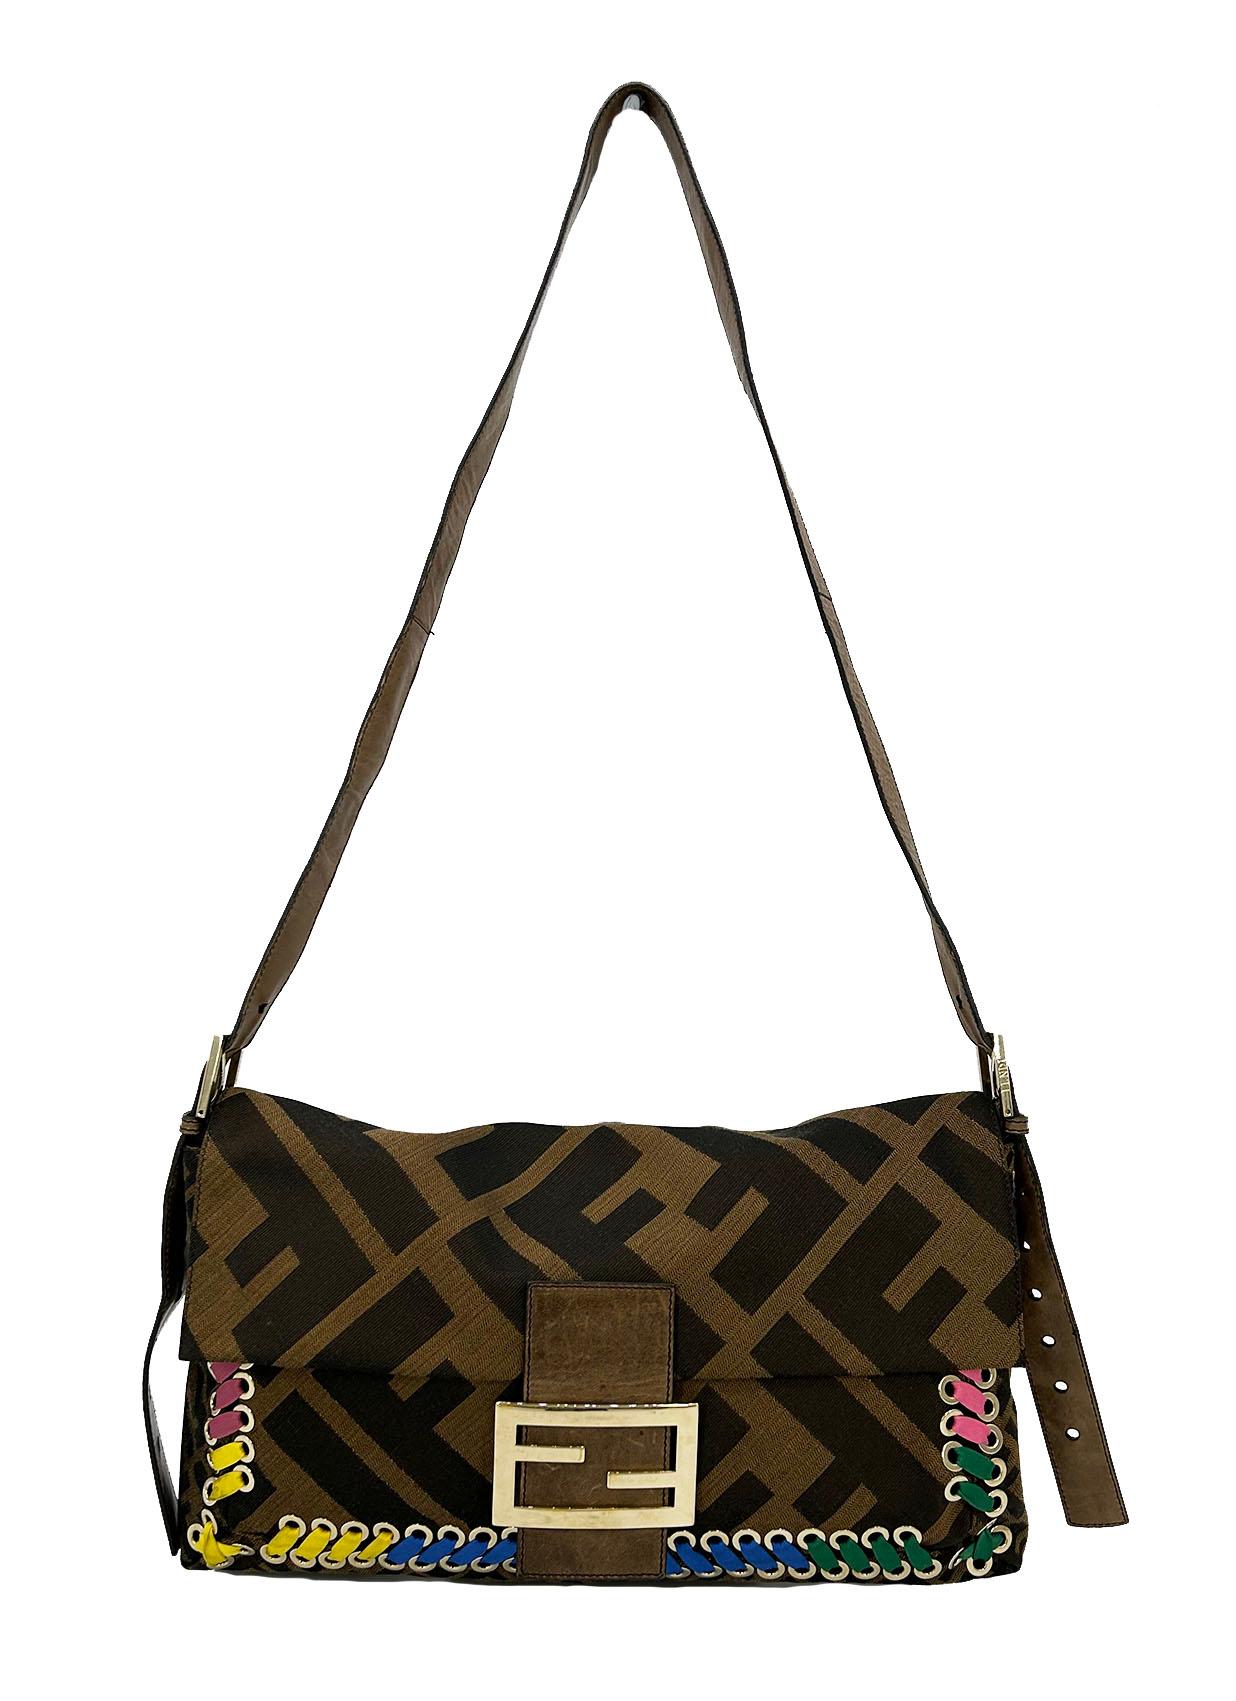 Fendi Zucca Canvas Rainbow Whipstitch XL Baguette in very good condition. Signature zucca monogram print canvas trimmed with brown leather, gold hardware and unique rainbow shoelace style whipstitch along front side. Adjustable and removable